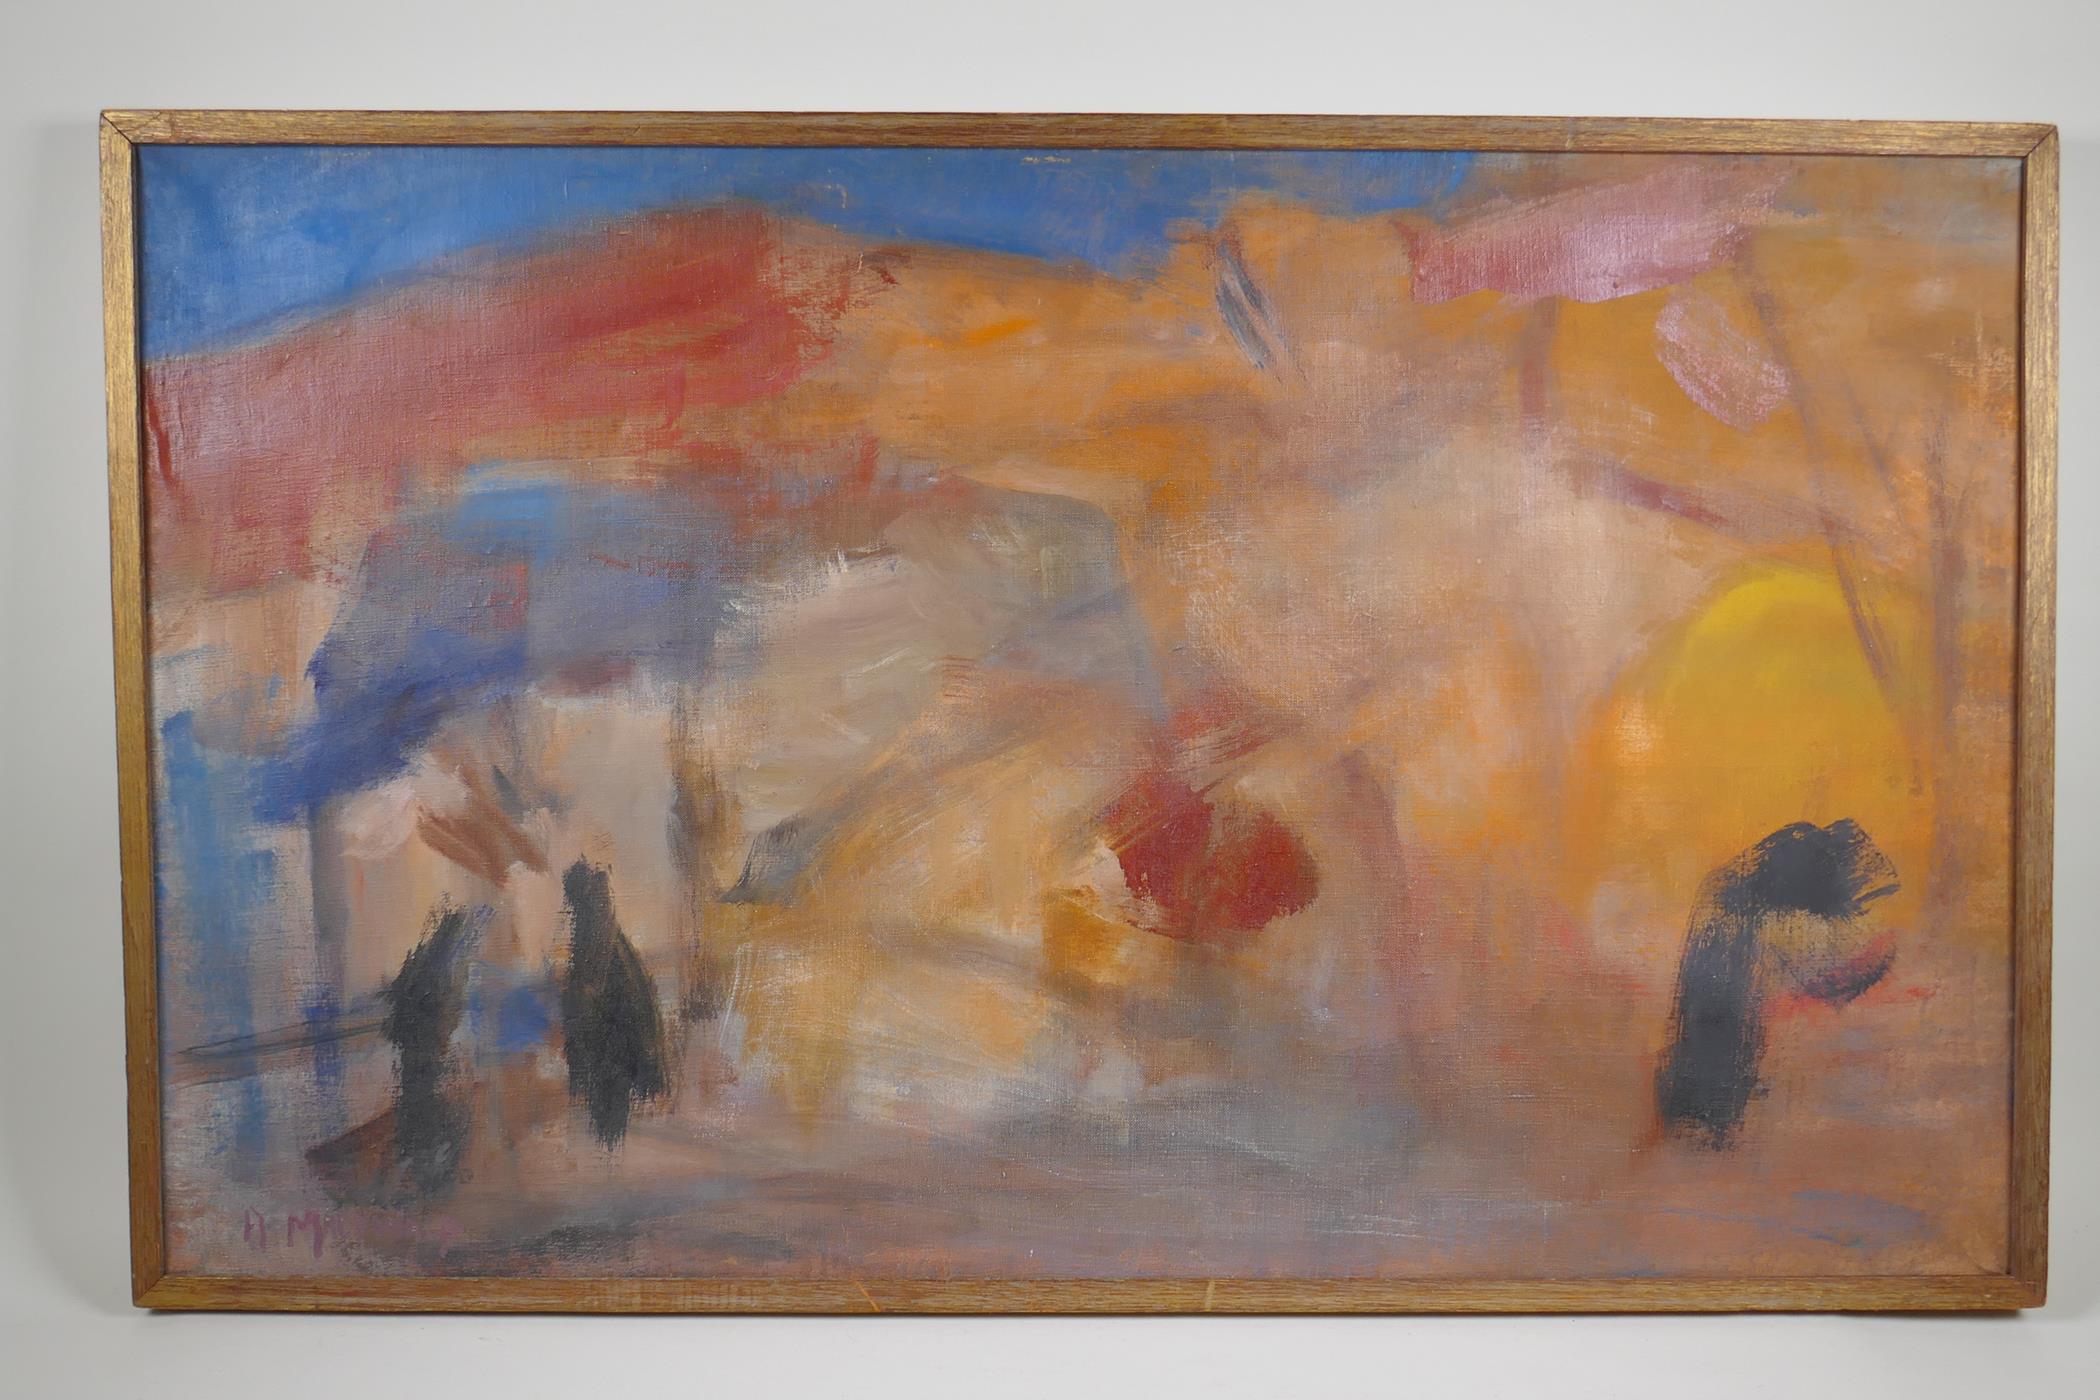 A. MacDonald, abstract landscape, signed, early C20th, oil on canvas, 55 x 91cm - Image 2 of 4